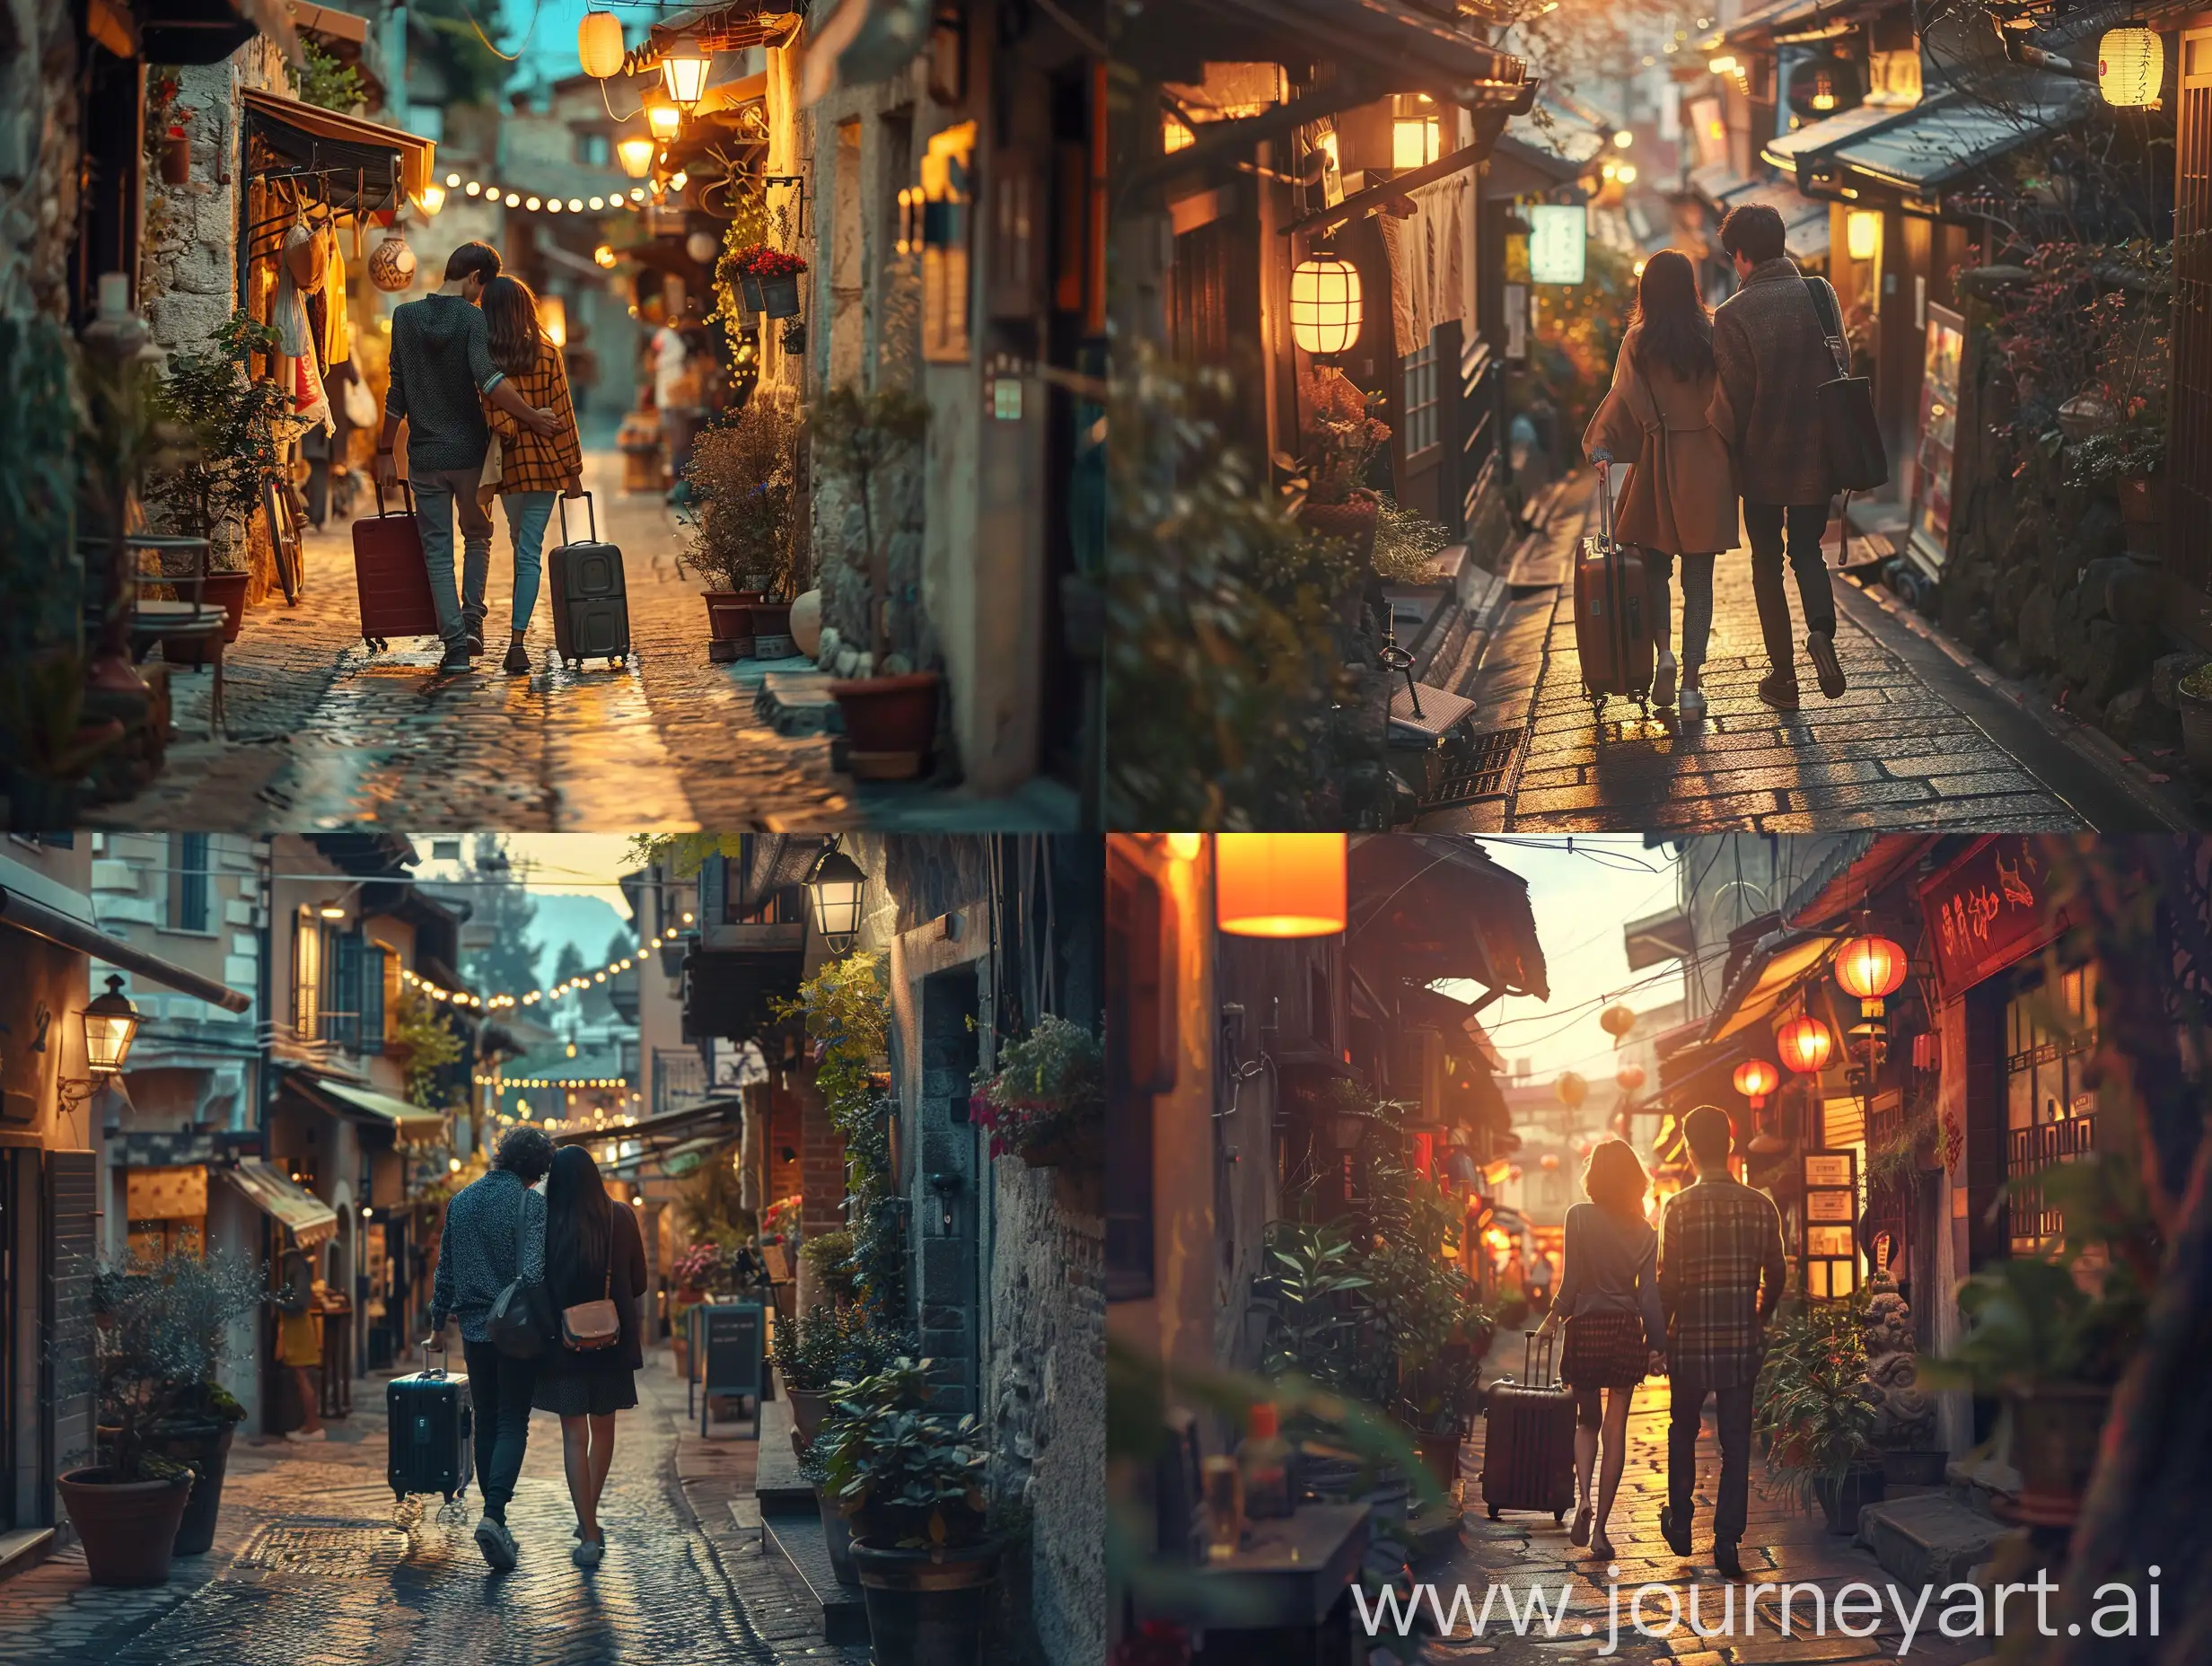 Create an image of a young couple walking down a narrow, warmly lit street at dusk. The woman carries a suitcase, and the street is lined with small shops and houses. The view is from behind, focusing on their synchronized steps and the closeness they share as they walk away from the camera.